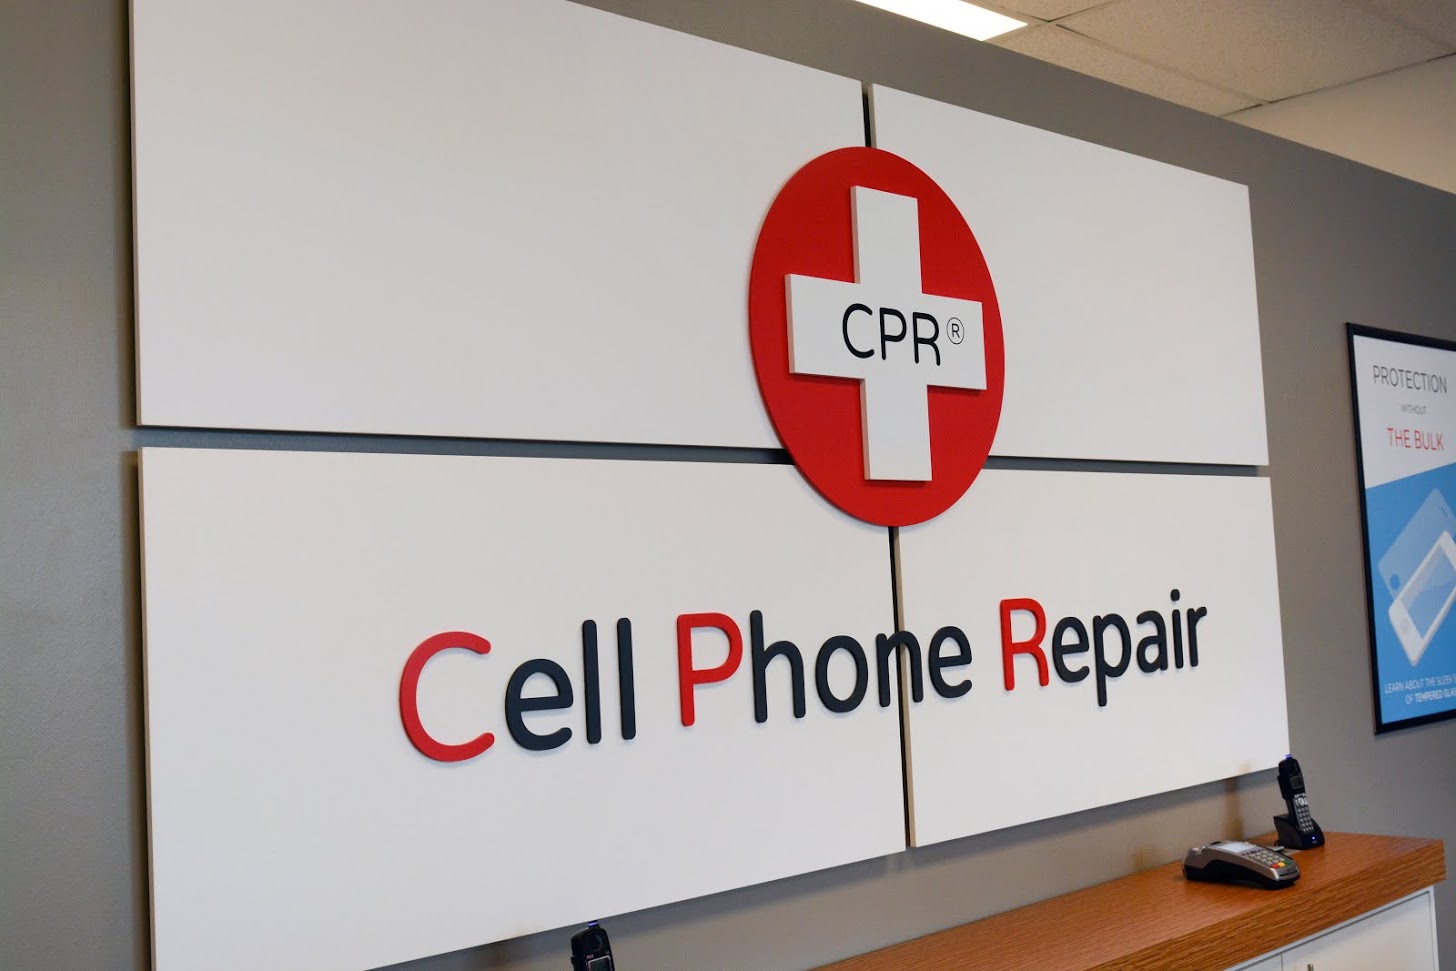 CPR Cell Phone Repair, Thursday, January 18, 2018, Press release picture